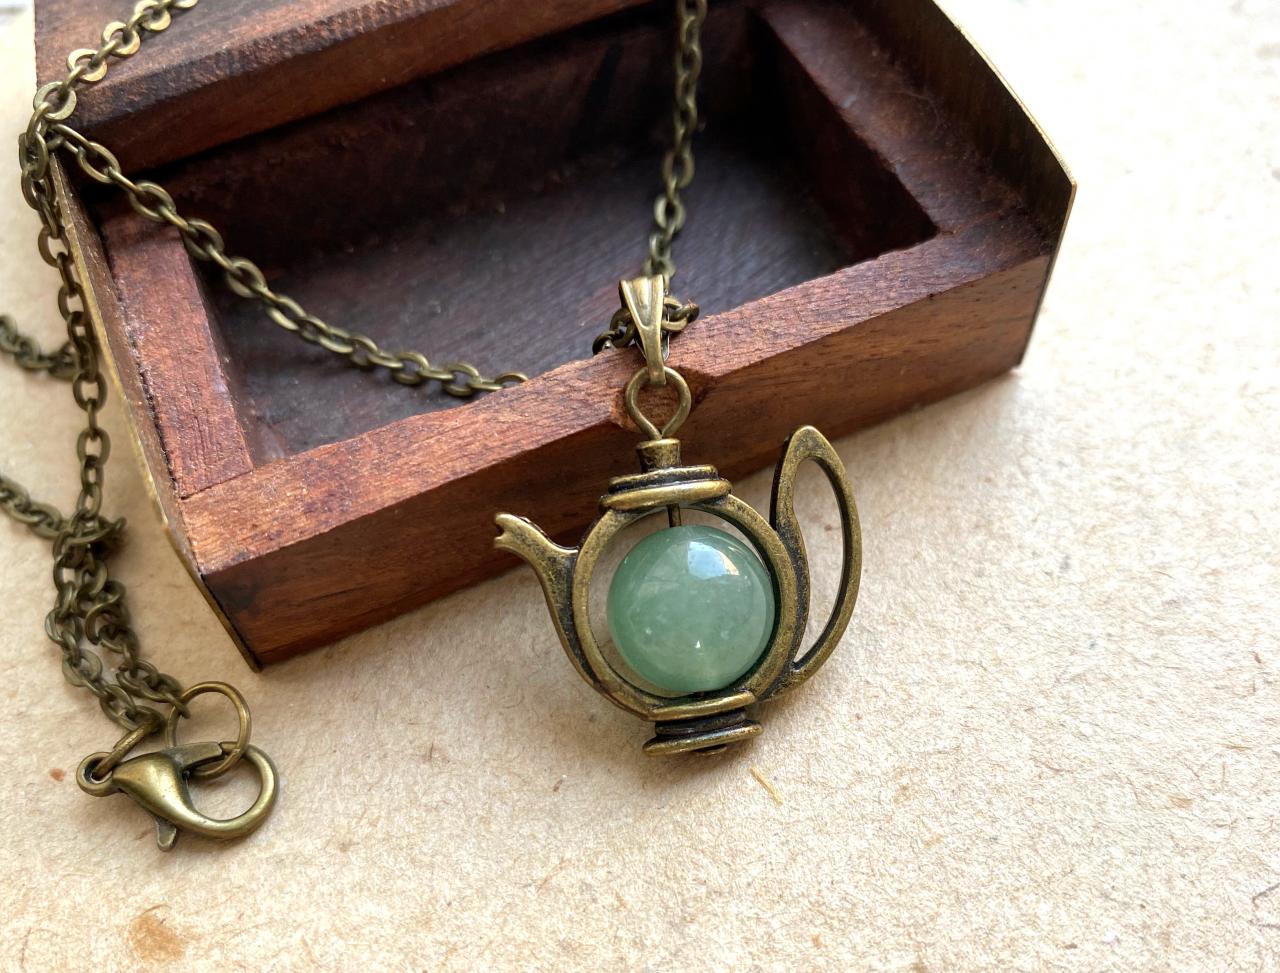 Teapot Necklace With A Green Aventurine Crystal Pearl, Alice In Wonderland Inspired, Green Aventurine Necklace, Fun Necklace, Whimsical Fun